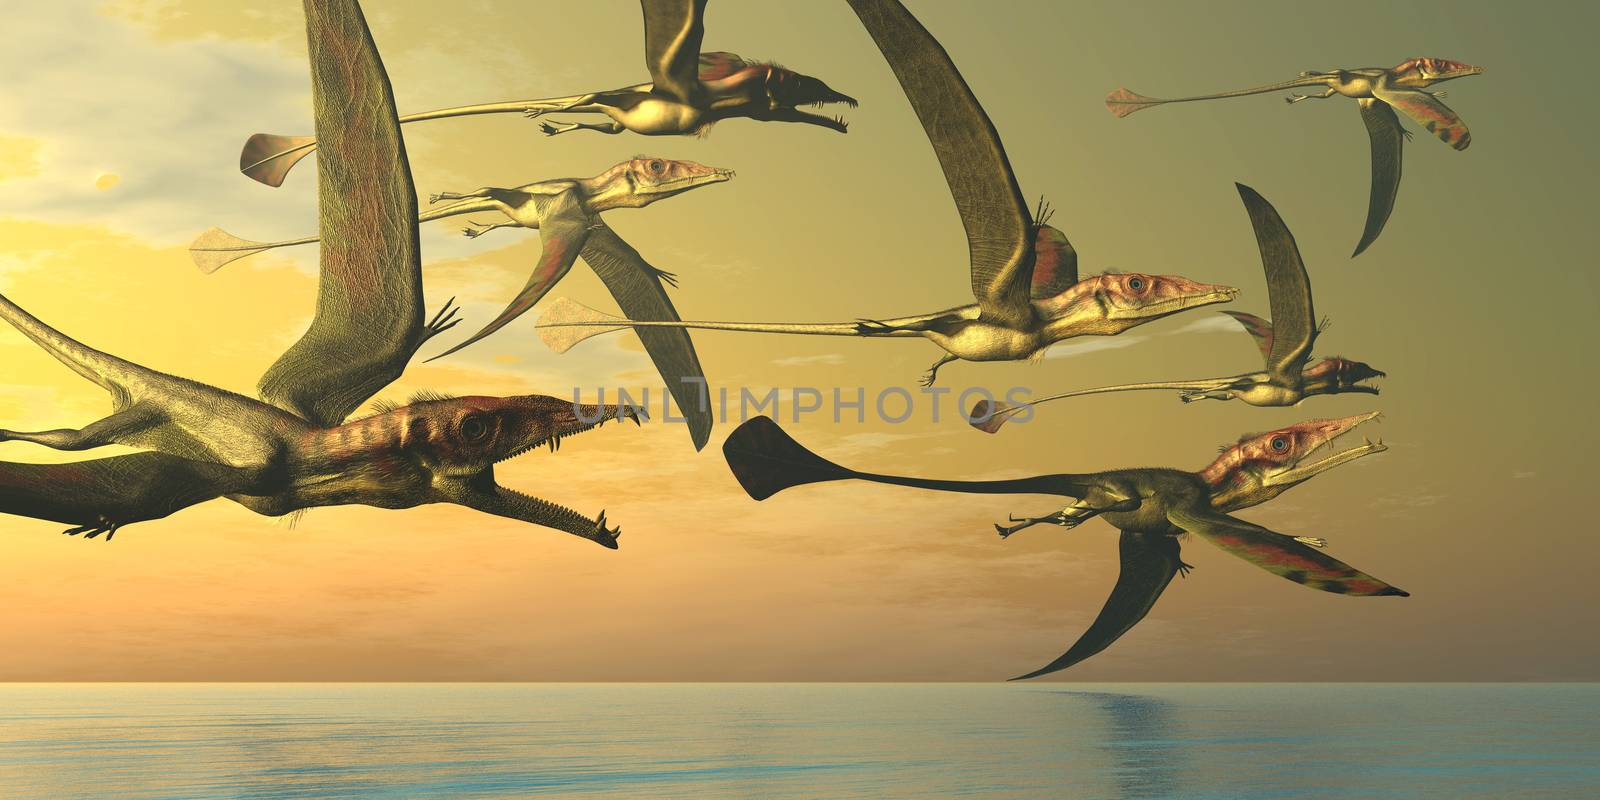 A flock of Eudimorphodon flying reptiles search for fish prey in the Triassic Era.